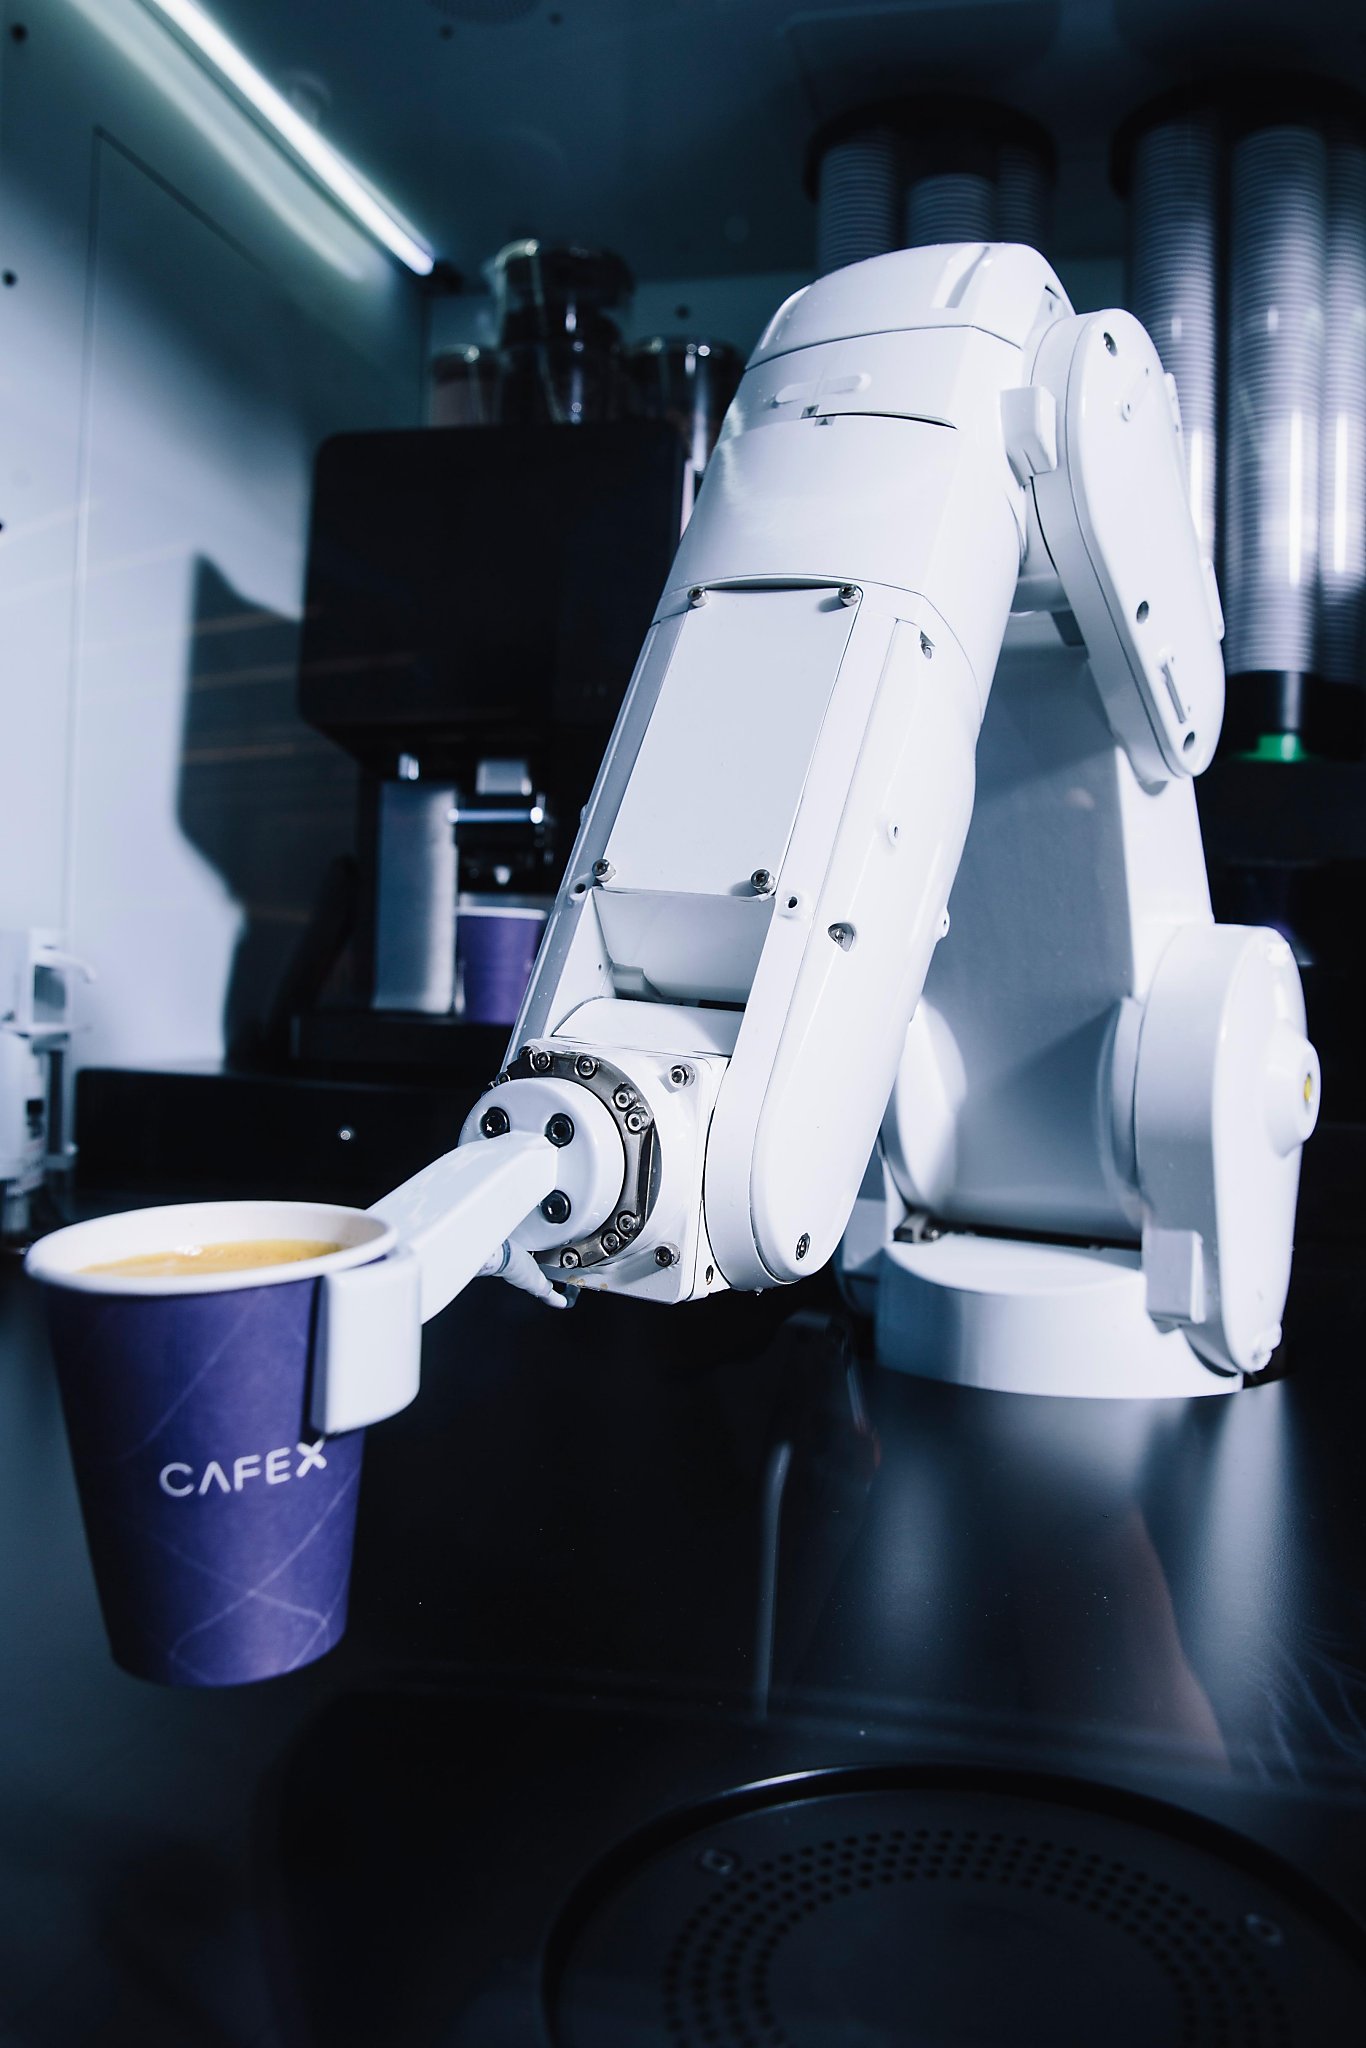 NSFW means NOT SAFE! – Robots With Coffee